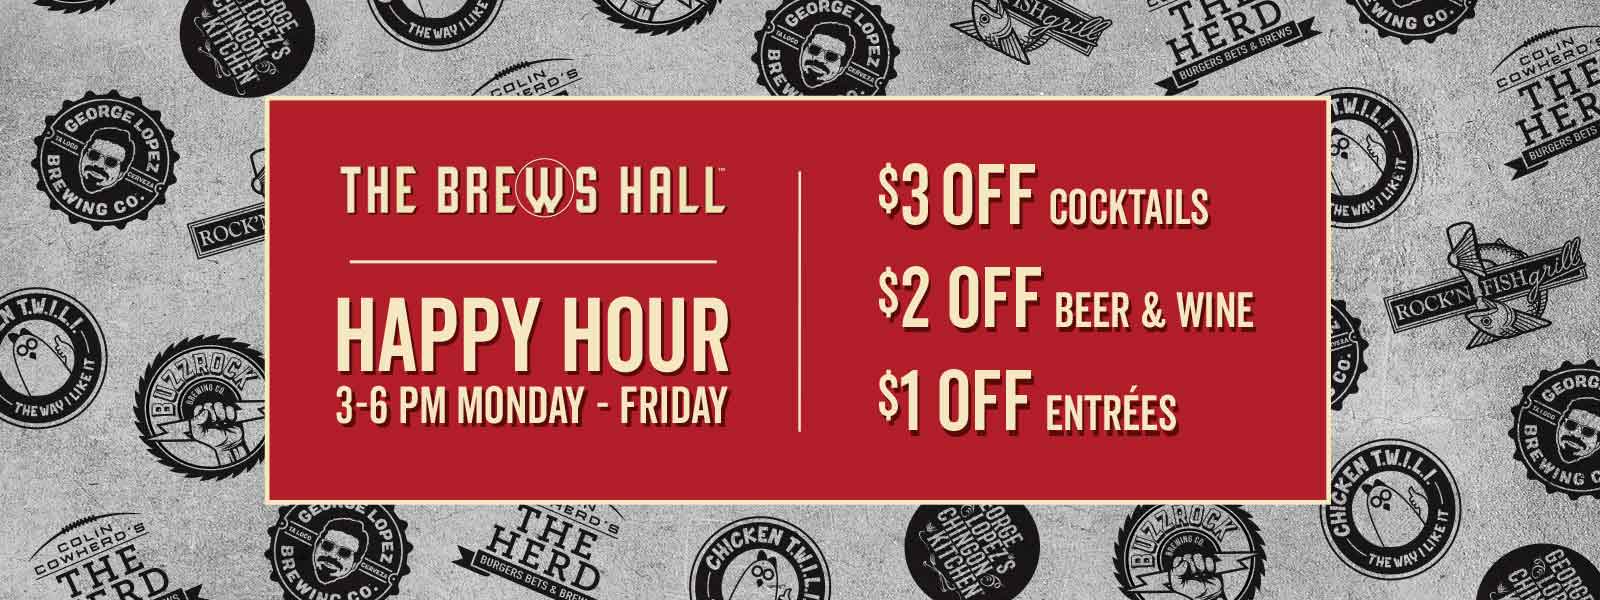 Happy Hour Offerings The Brews Hall